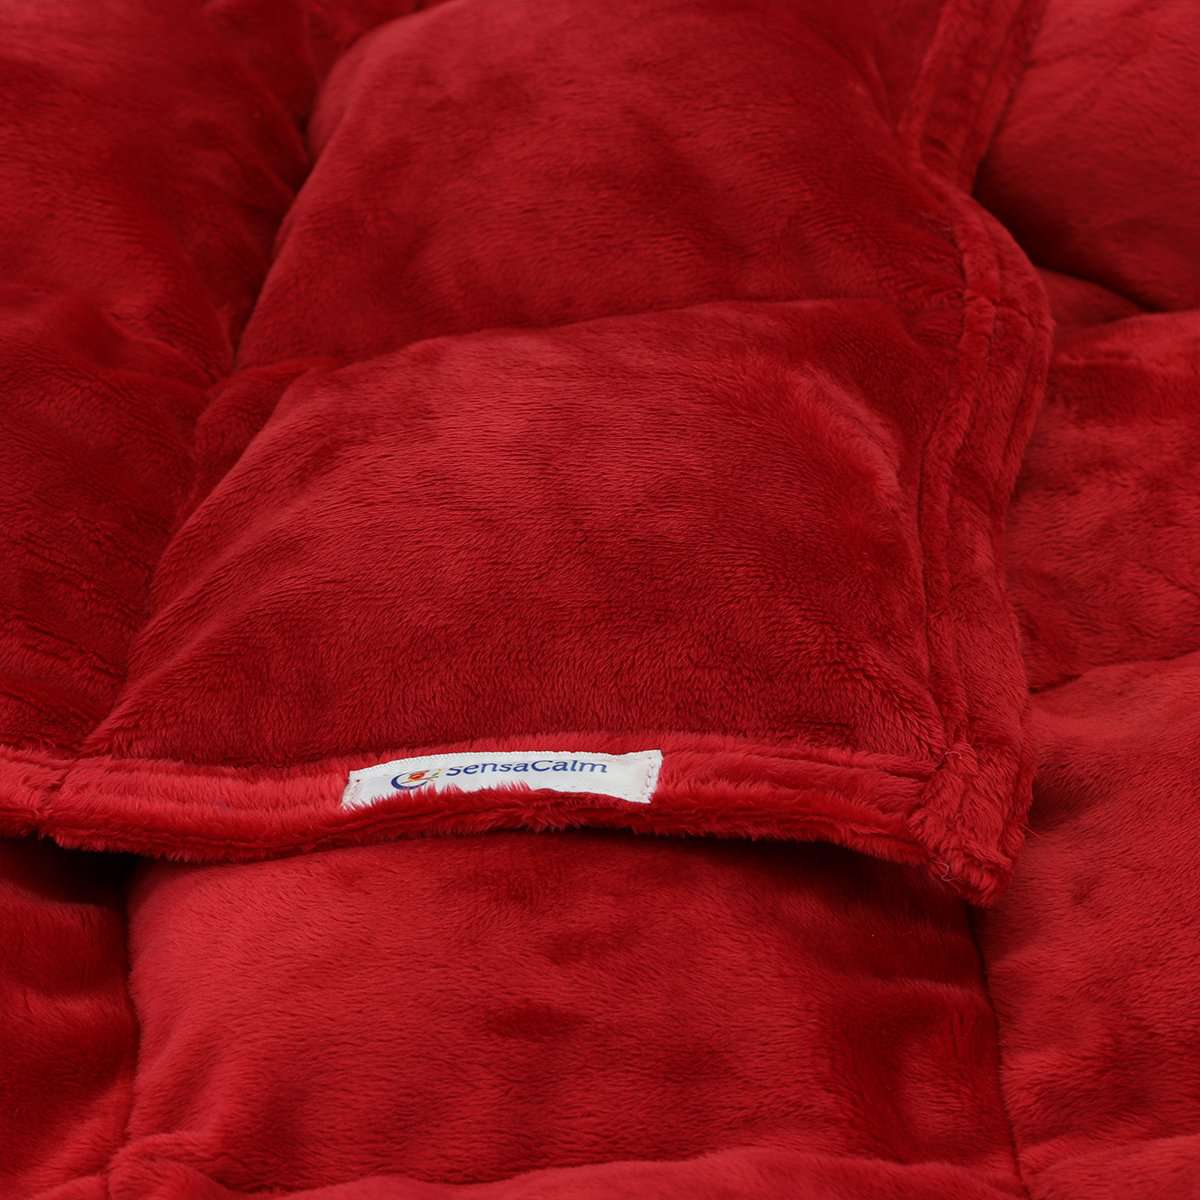 Custom Cuddle Weighted Blanket - Red